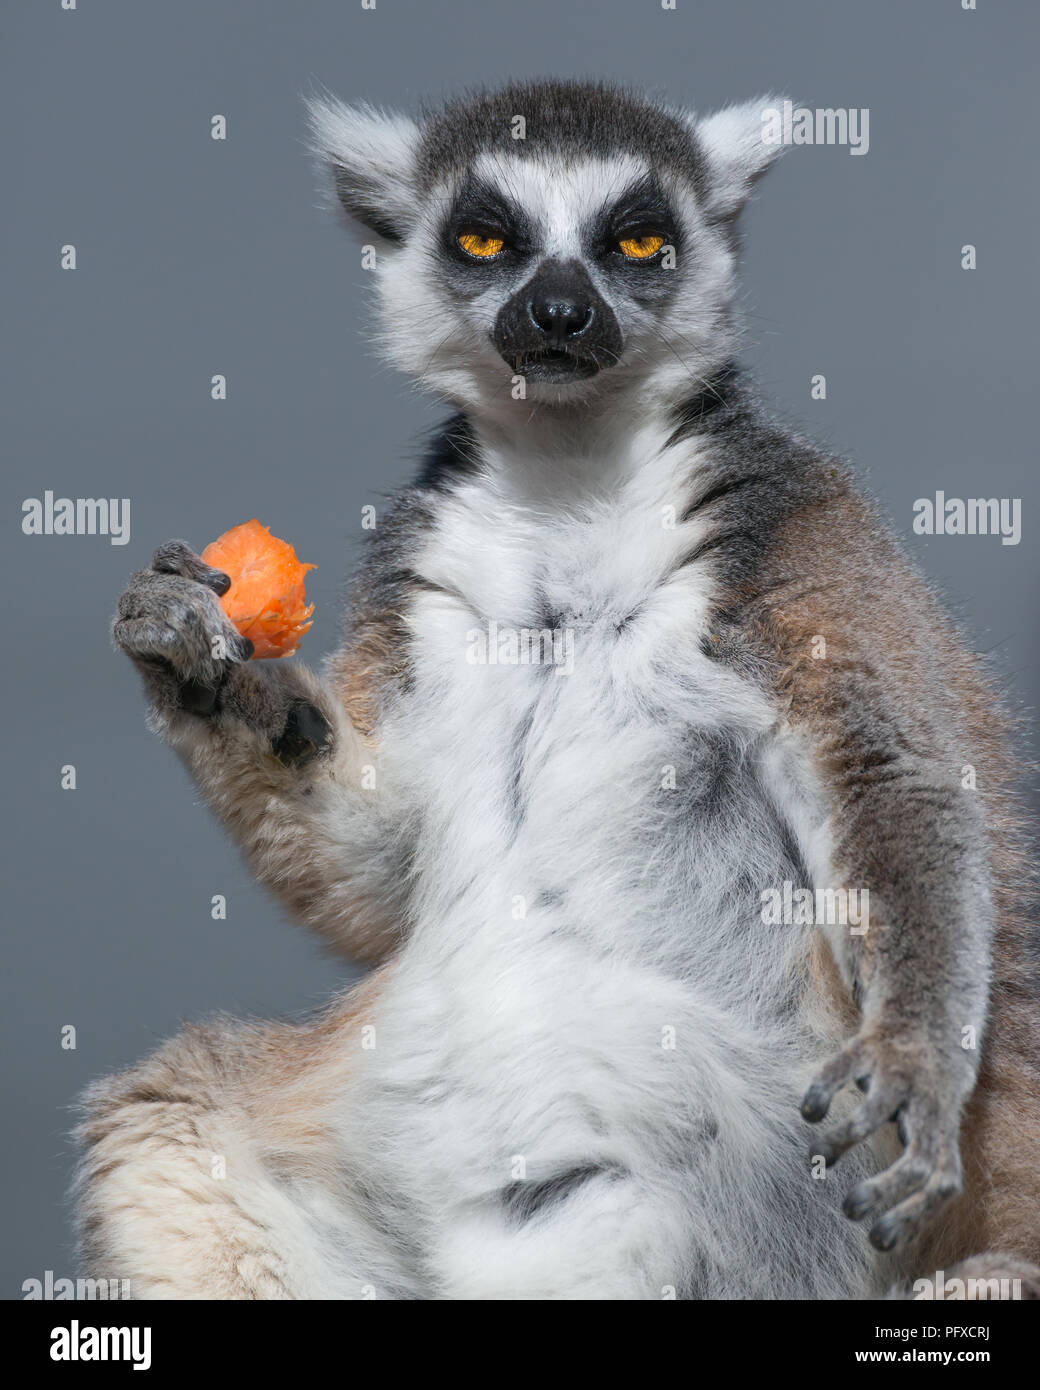 A Ring-tailed Lemur enjoys a carrot at Taronga Zoo in Sydney, Australia. Native to Madagascar, Ring-tailed Lemurs are endangered in the world. Stock Photo